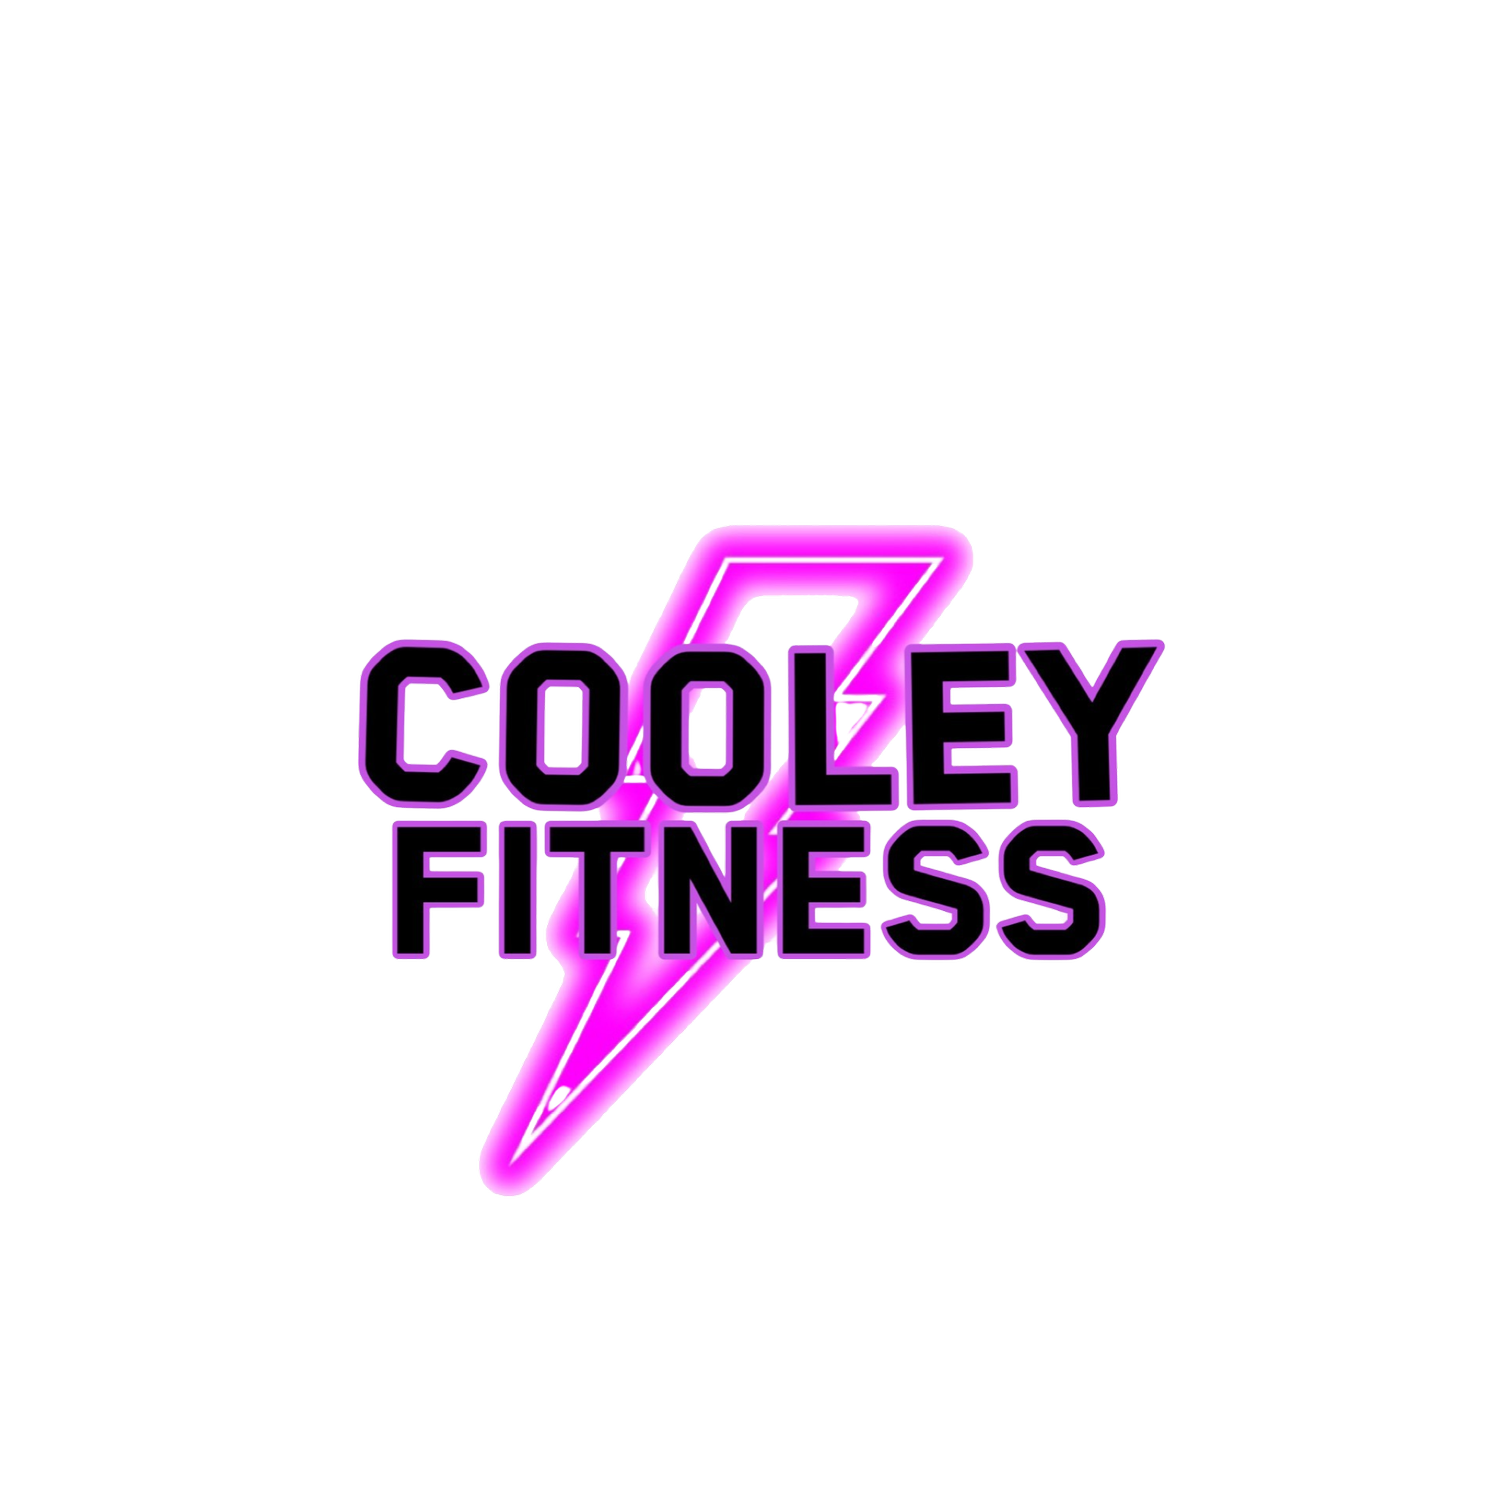 Cooley Fitness